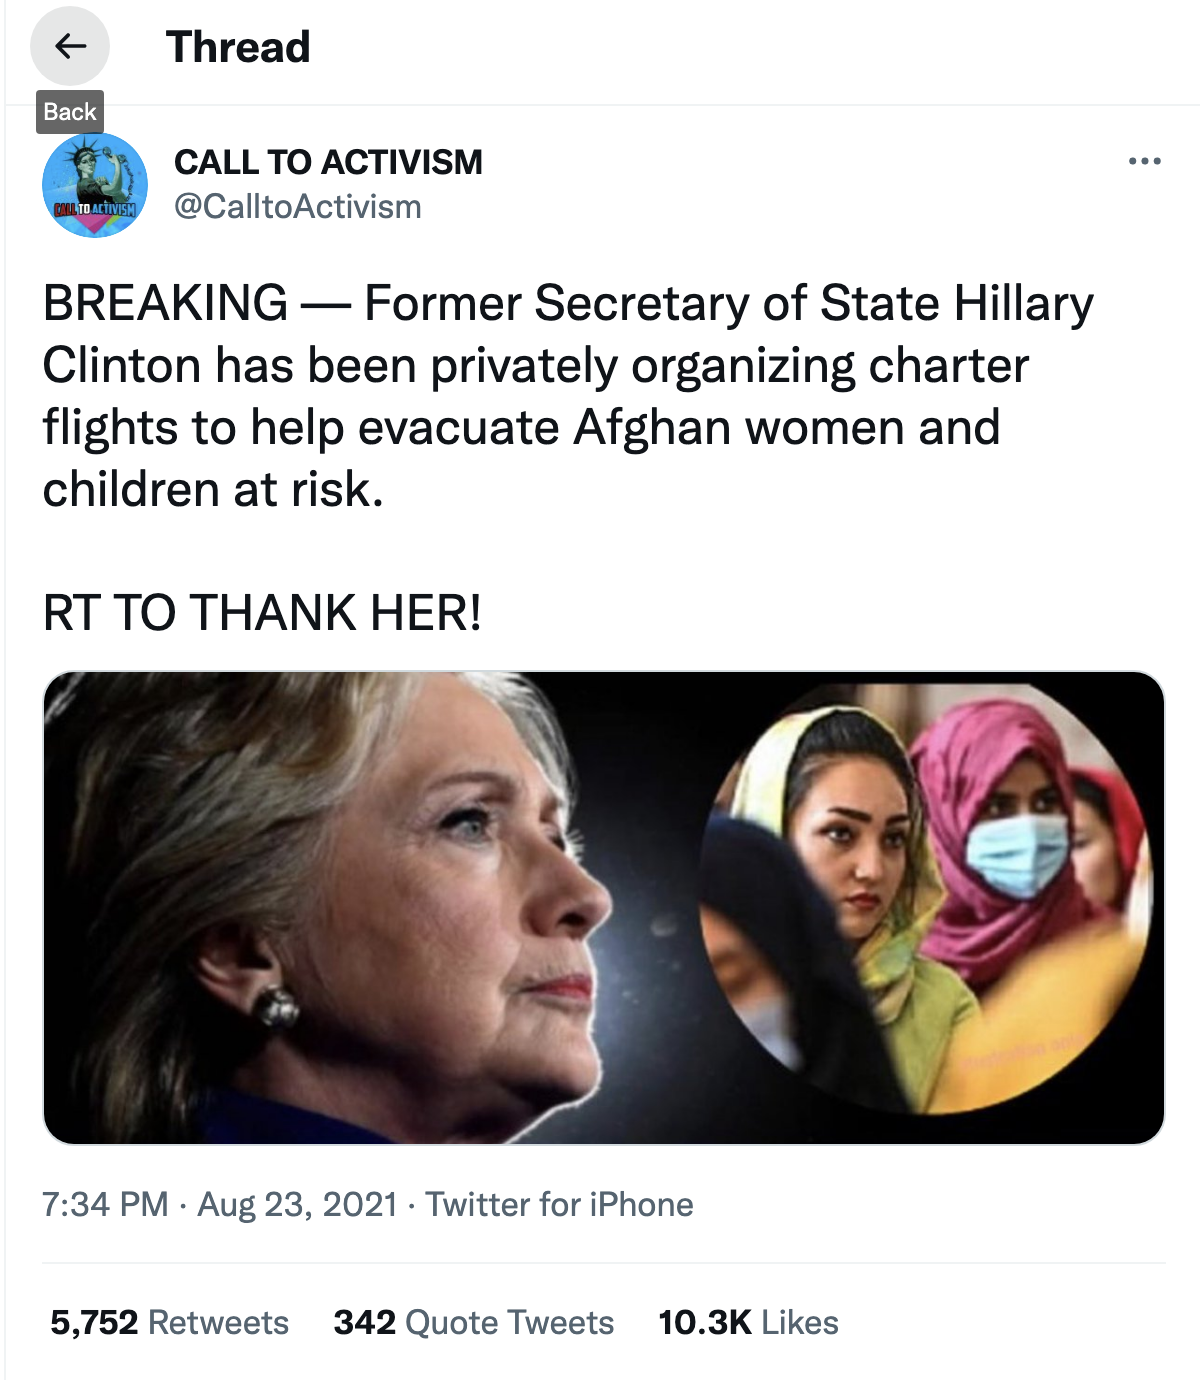 Screen-Shot-2021-08-25-at-3.54.16-PM Hillary Clinton Flies Targeted Afghan Women To Safety On Private Charters Featured Human Rights Politics Top Stories Women's Rights 